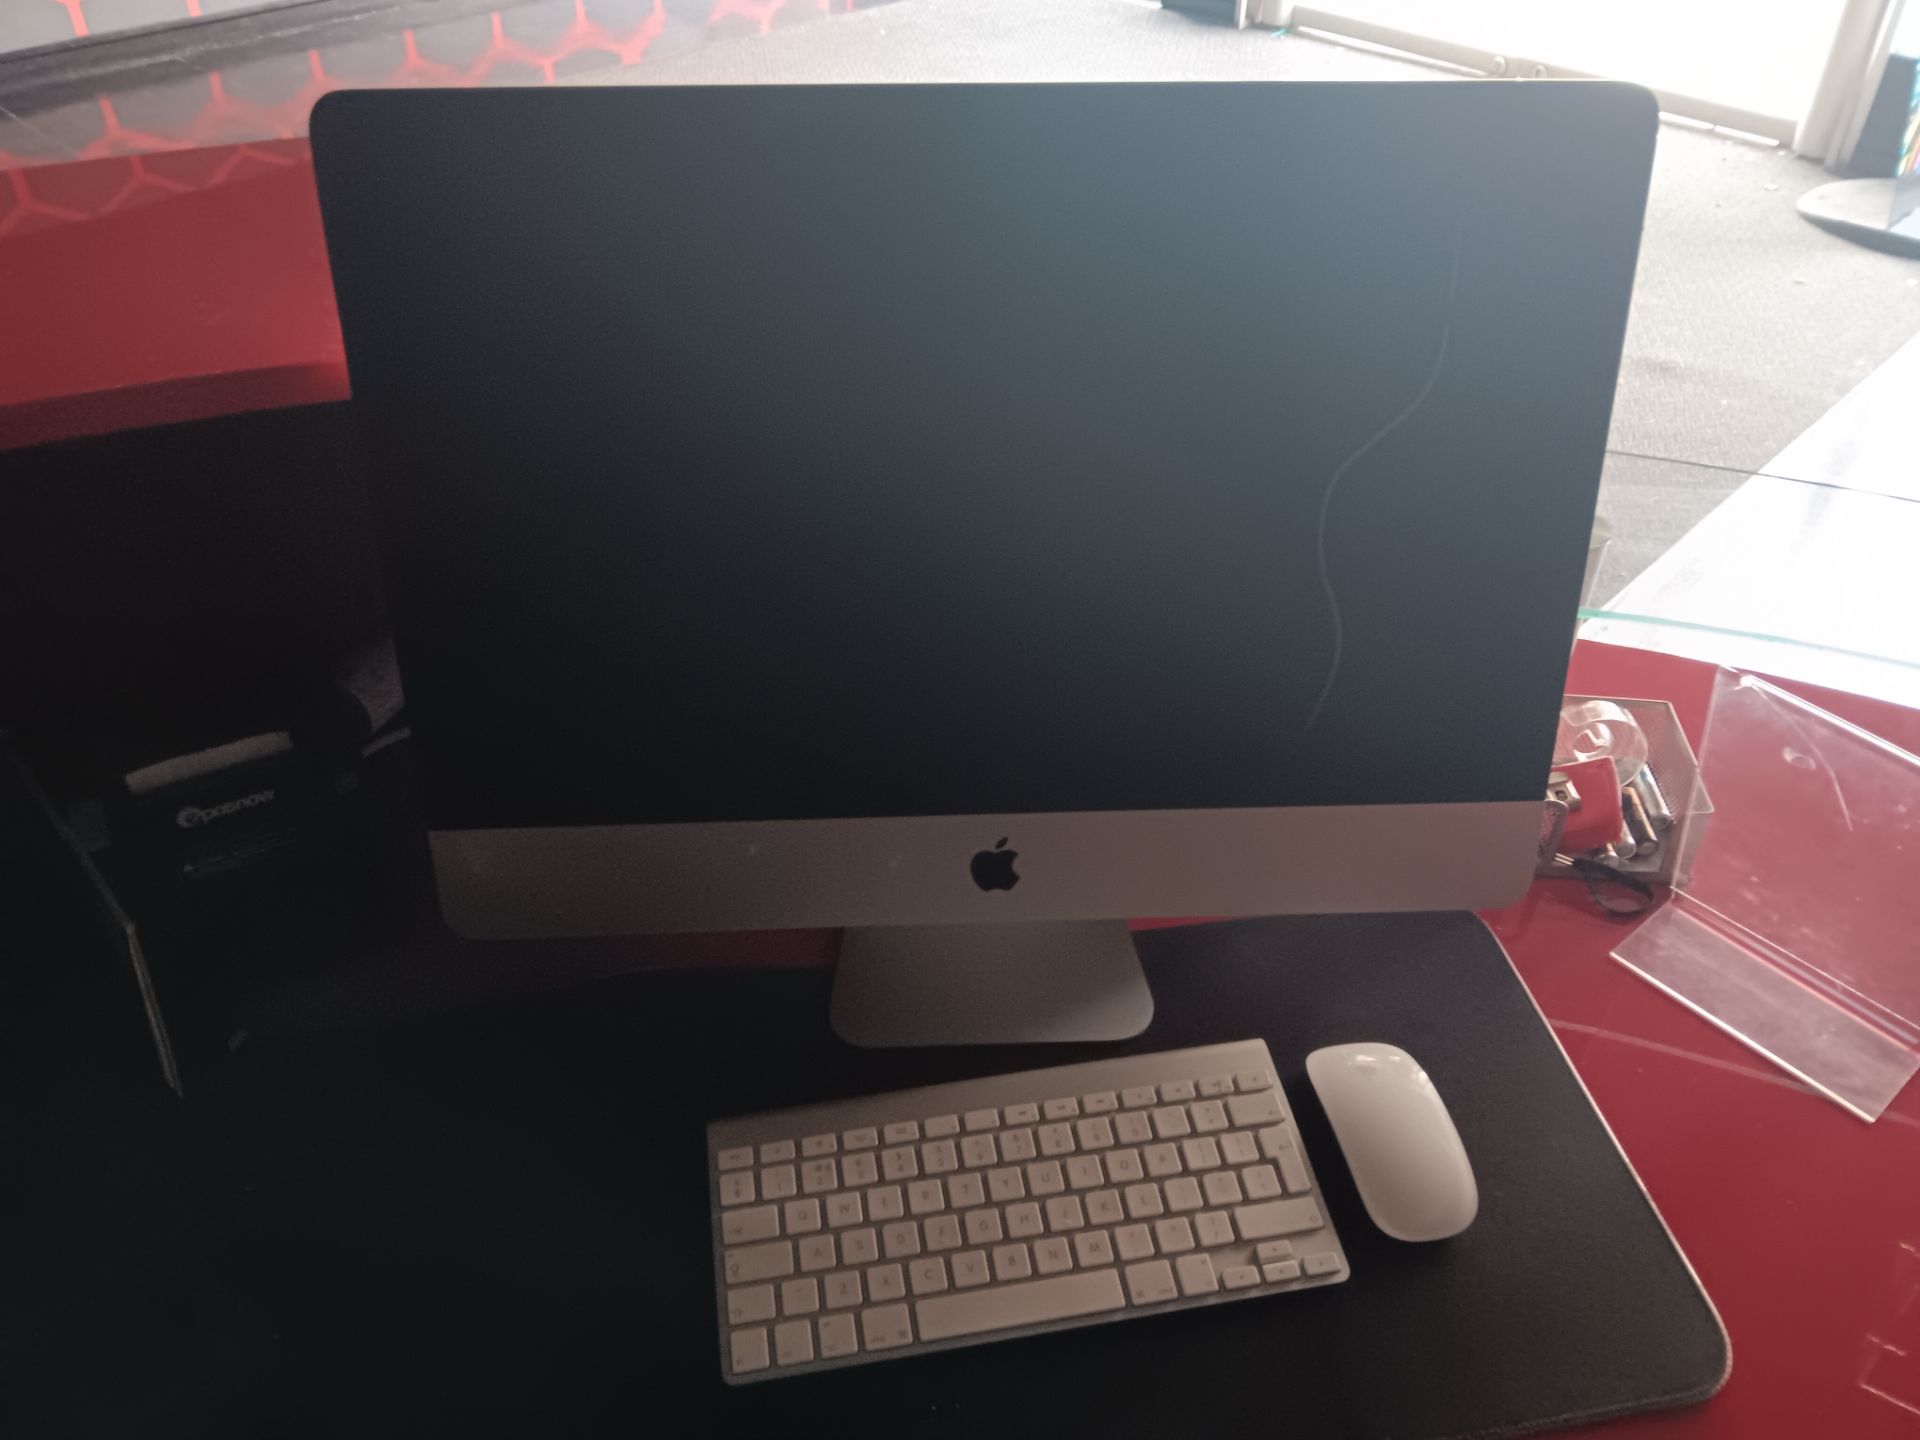 Apple iMac 21.5” All-In-One PC with Keyboard & Mouse